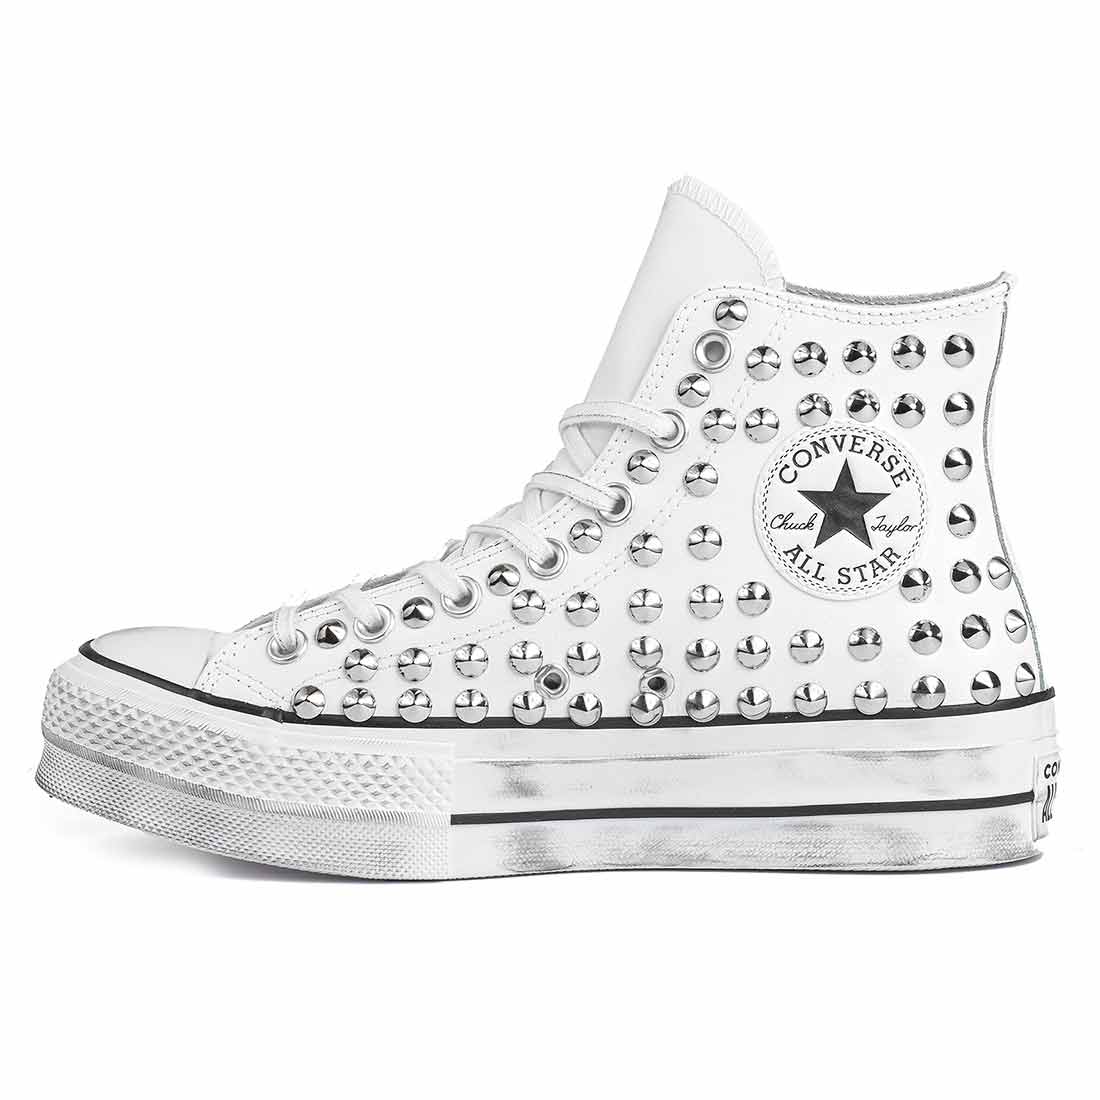 Converse All Star Platform Alte in Pelle con Borchie - Bianche | Racoon-LAB